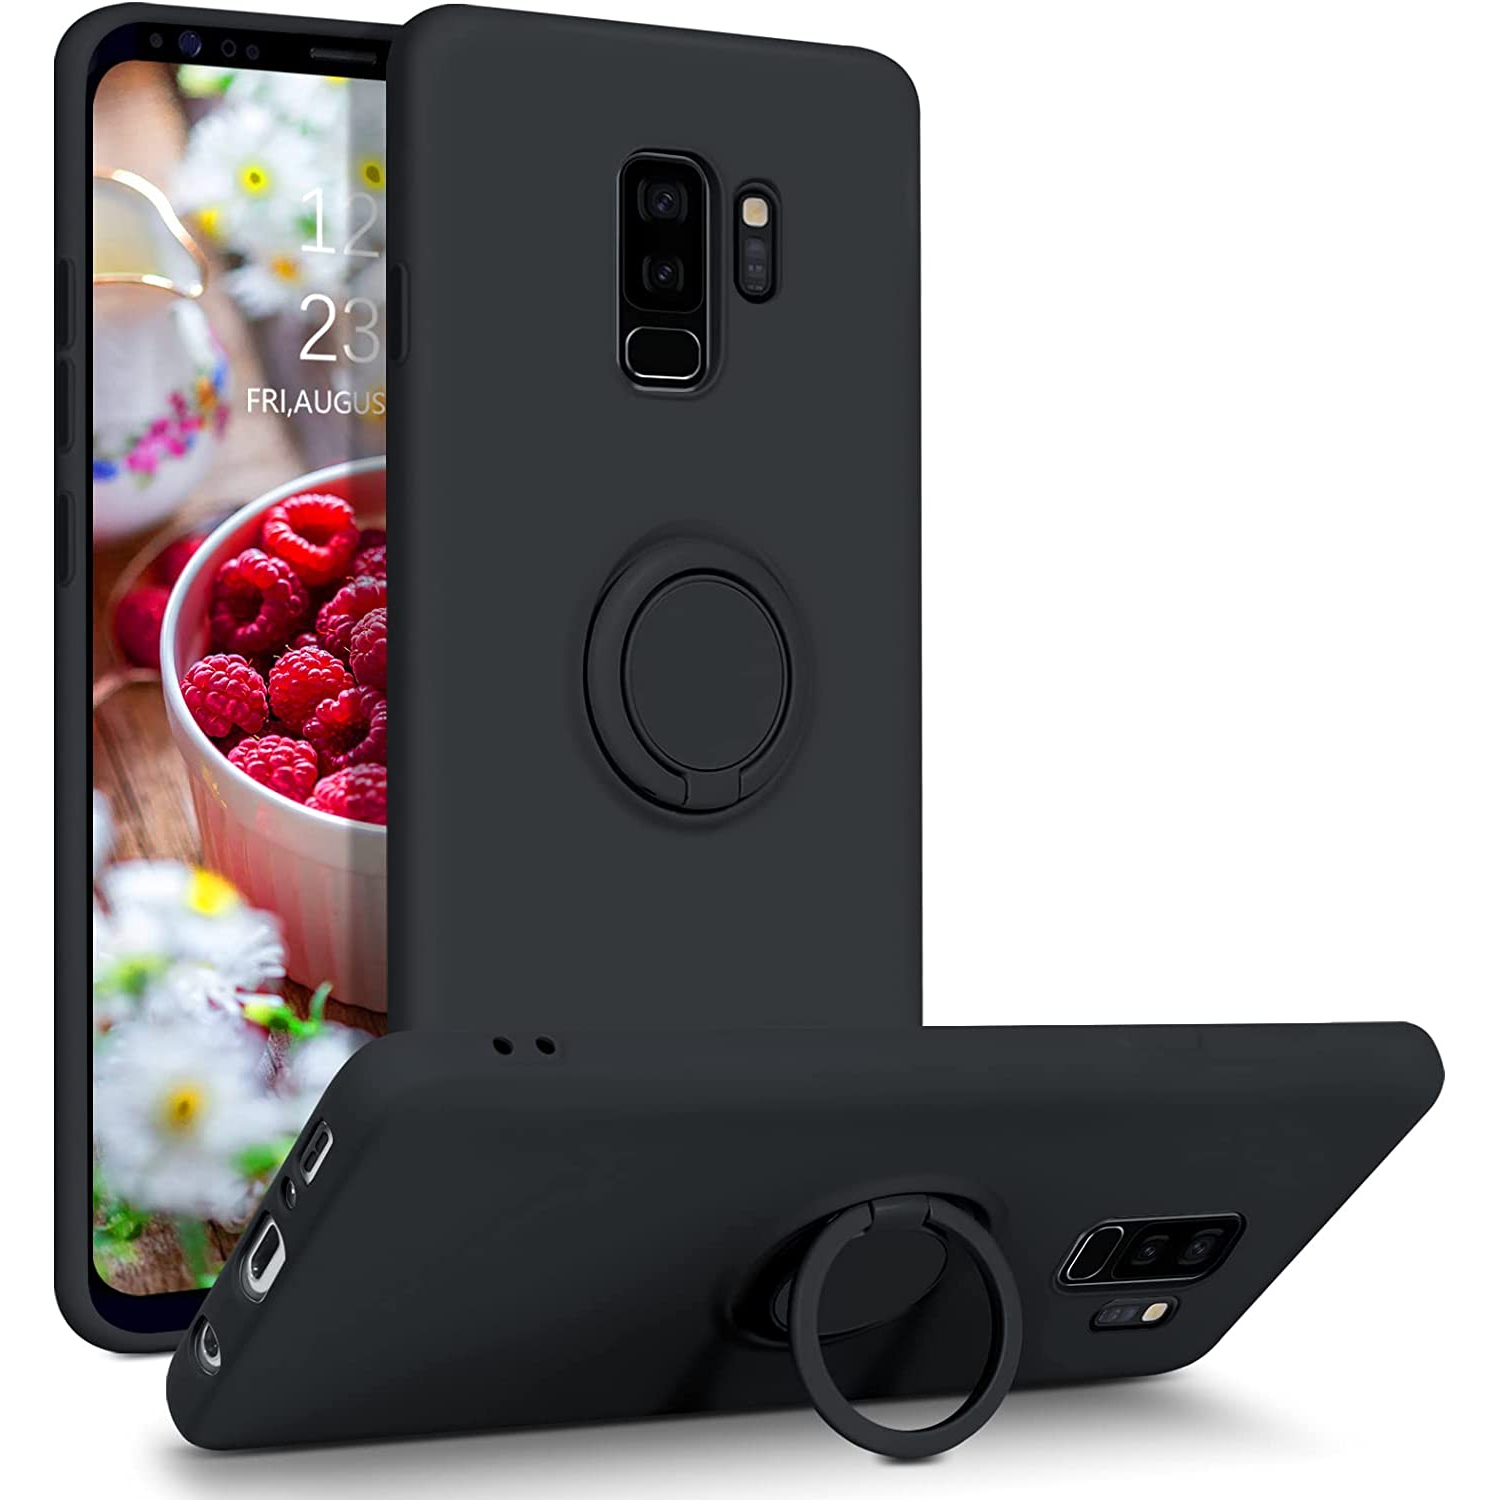 Samsung Galaxy S9 Plus Case Liquid Silicone Soft Gel Rubber Slim Cover with Ring Kickstand |Car Mount Function